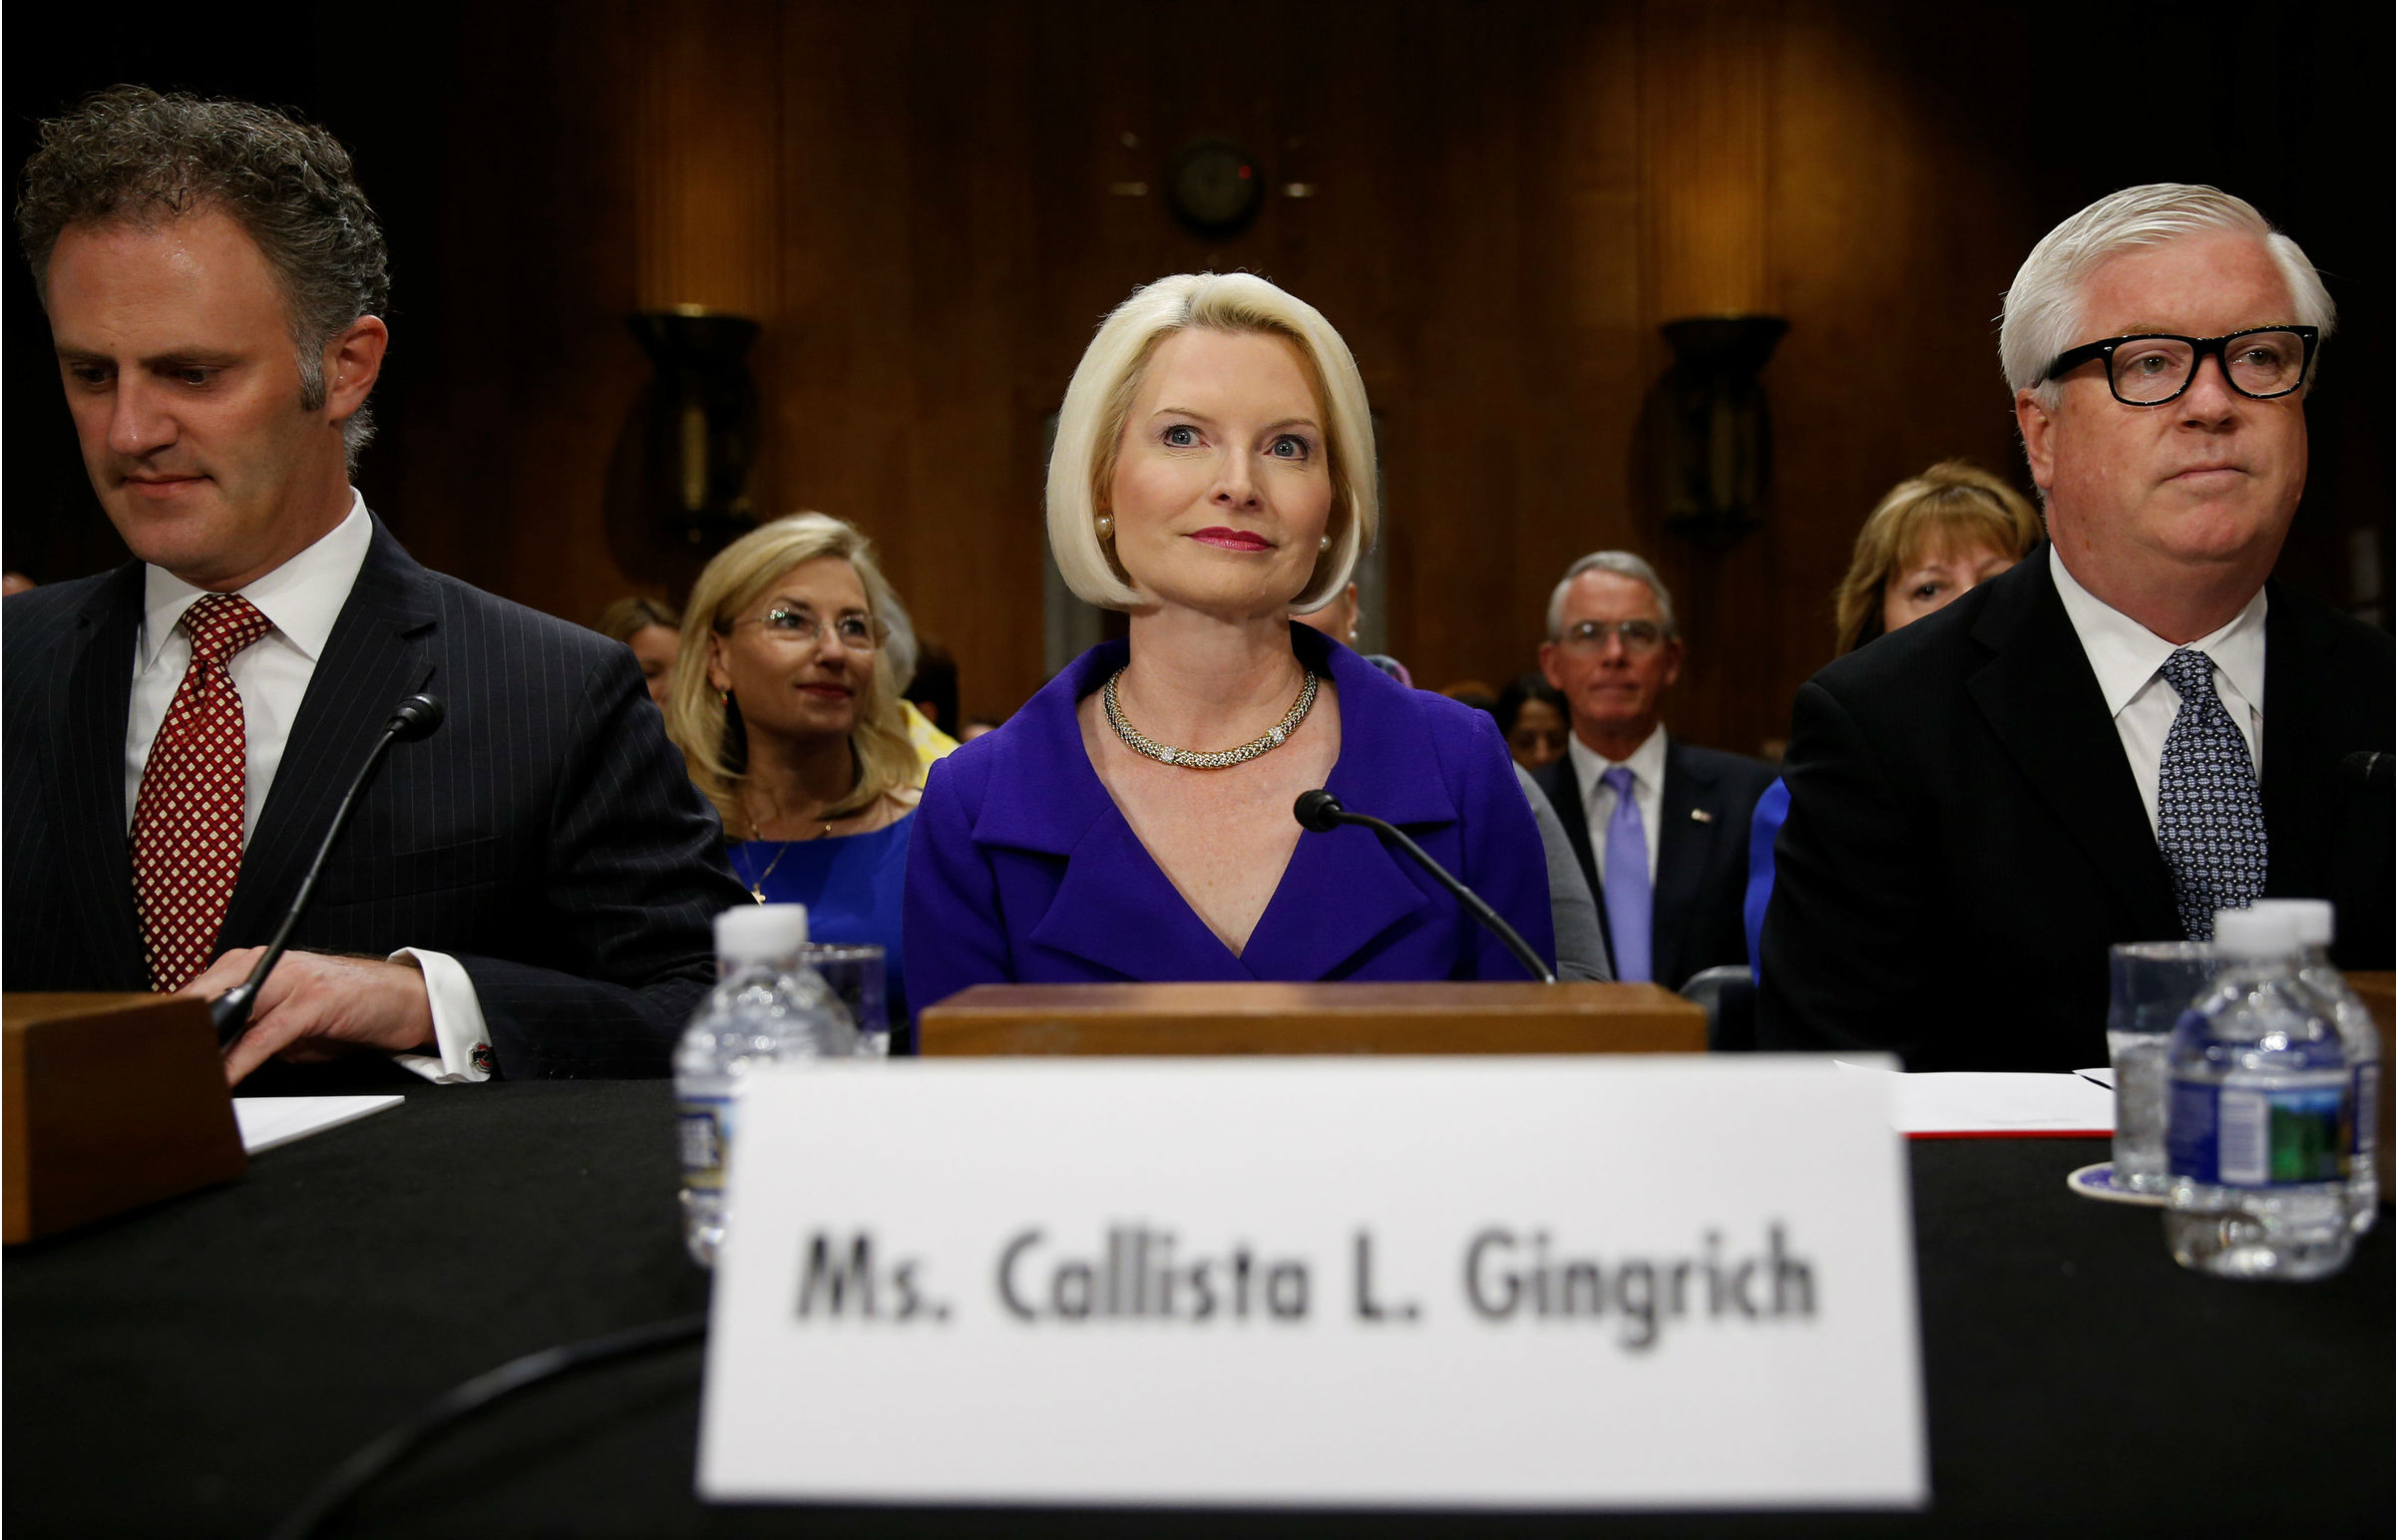 Senate committee considers Callista Gingrich nomination as US ambassador to the Vatican